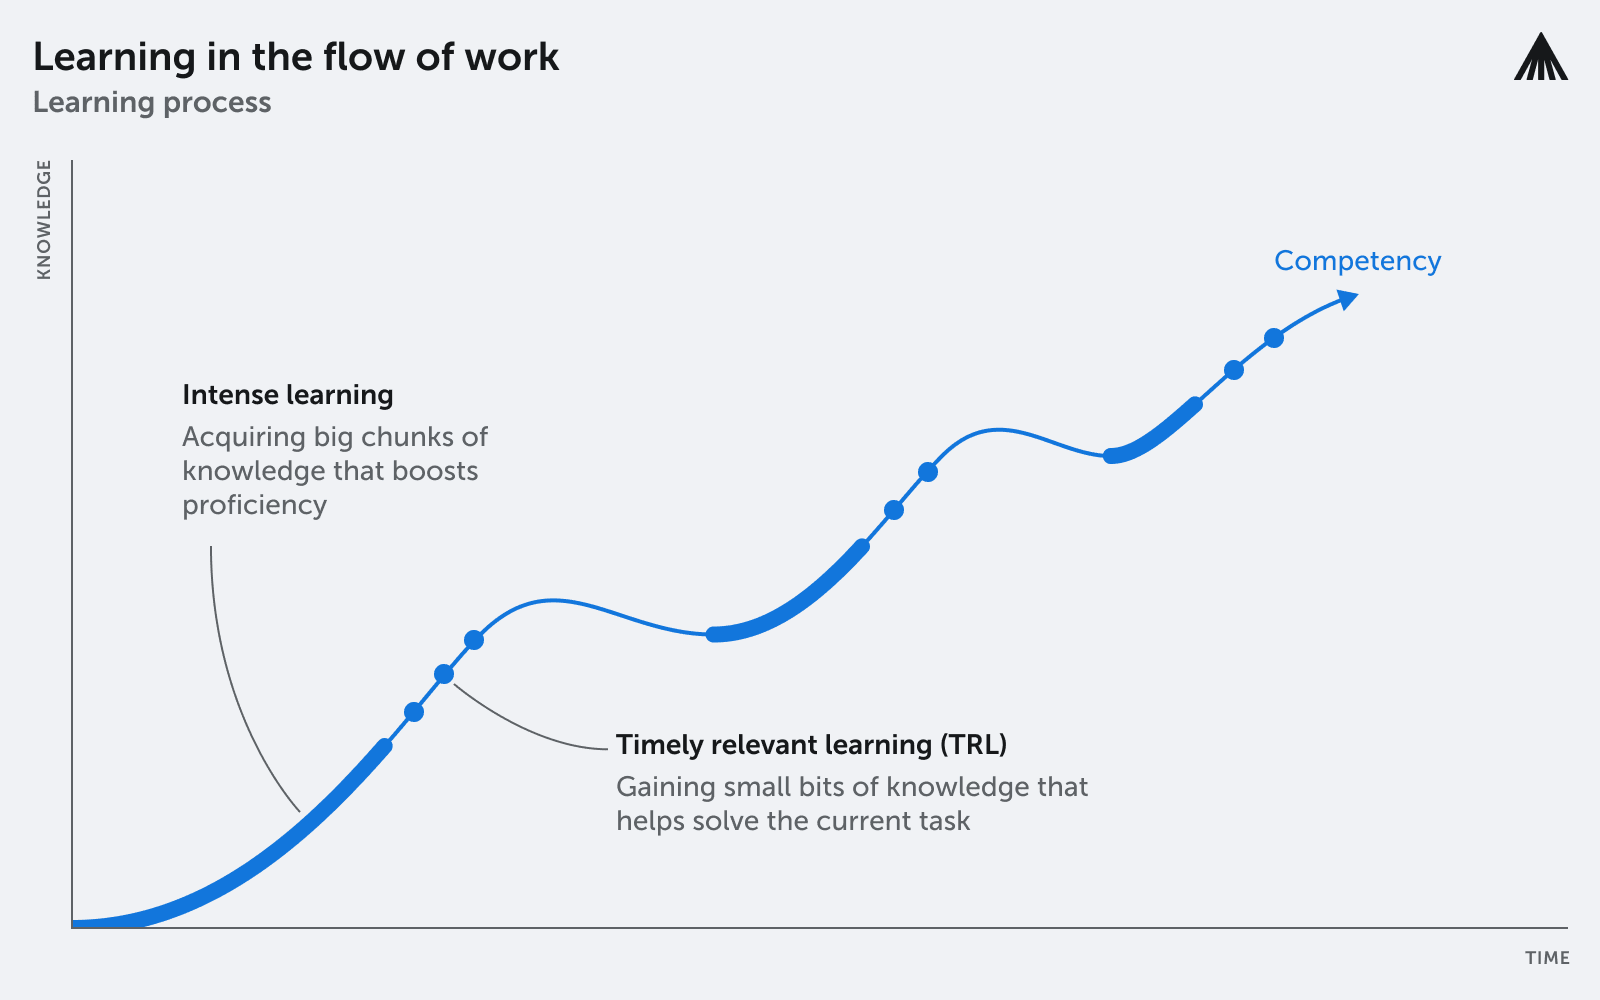 The image represents the process of learning in the flow of work